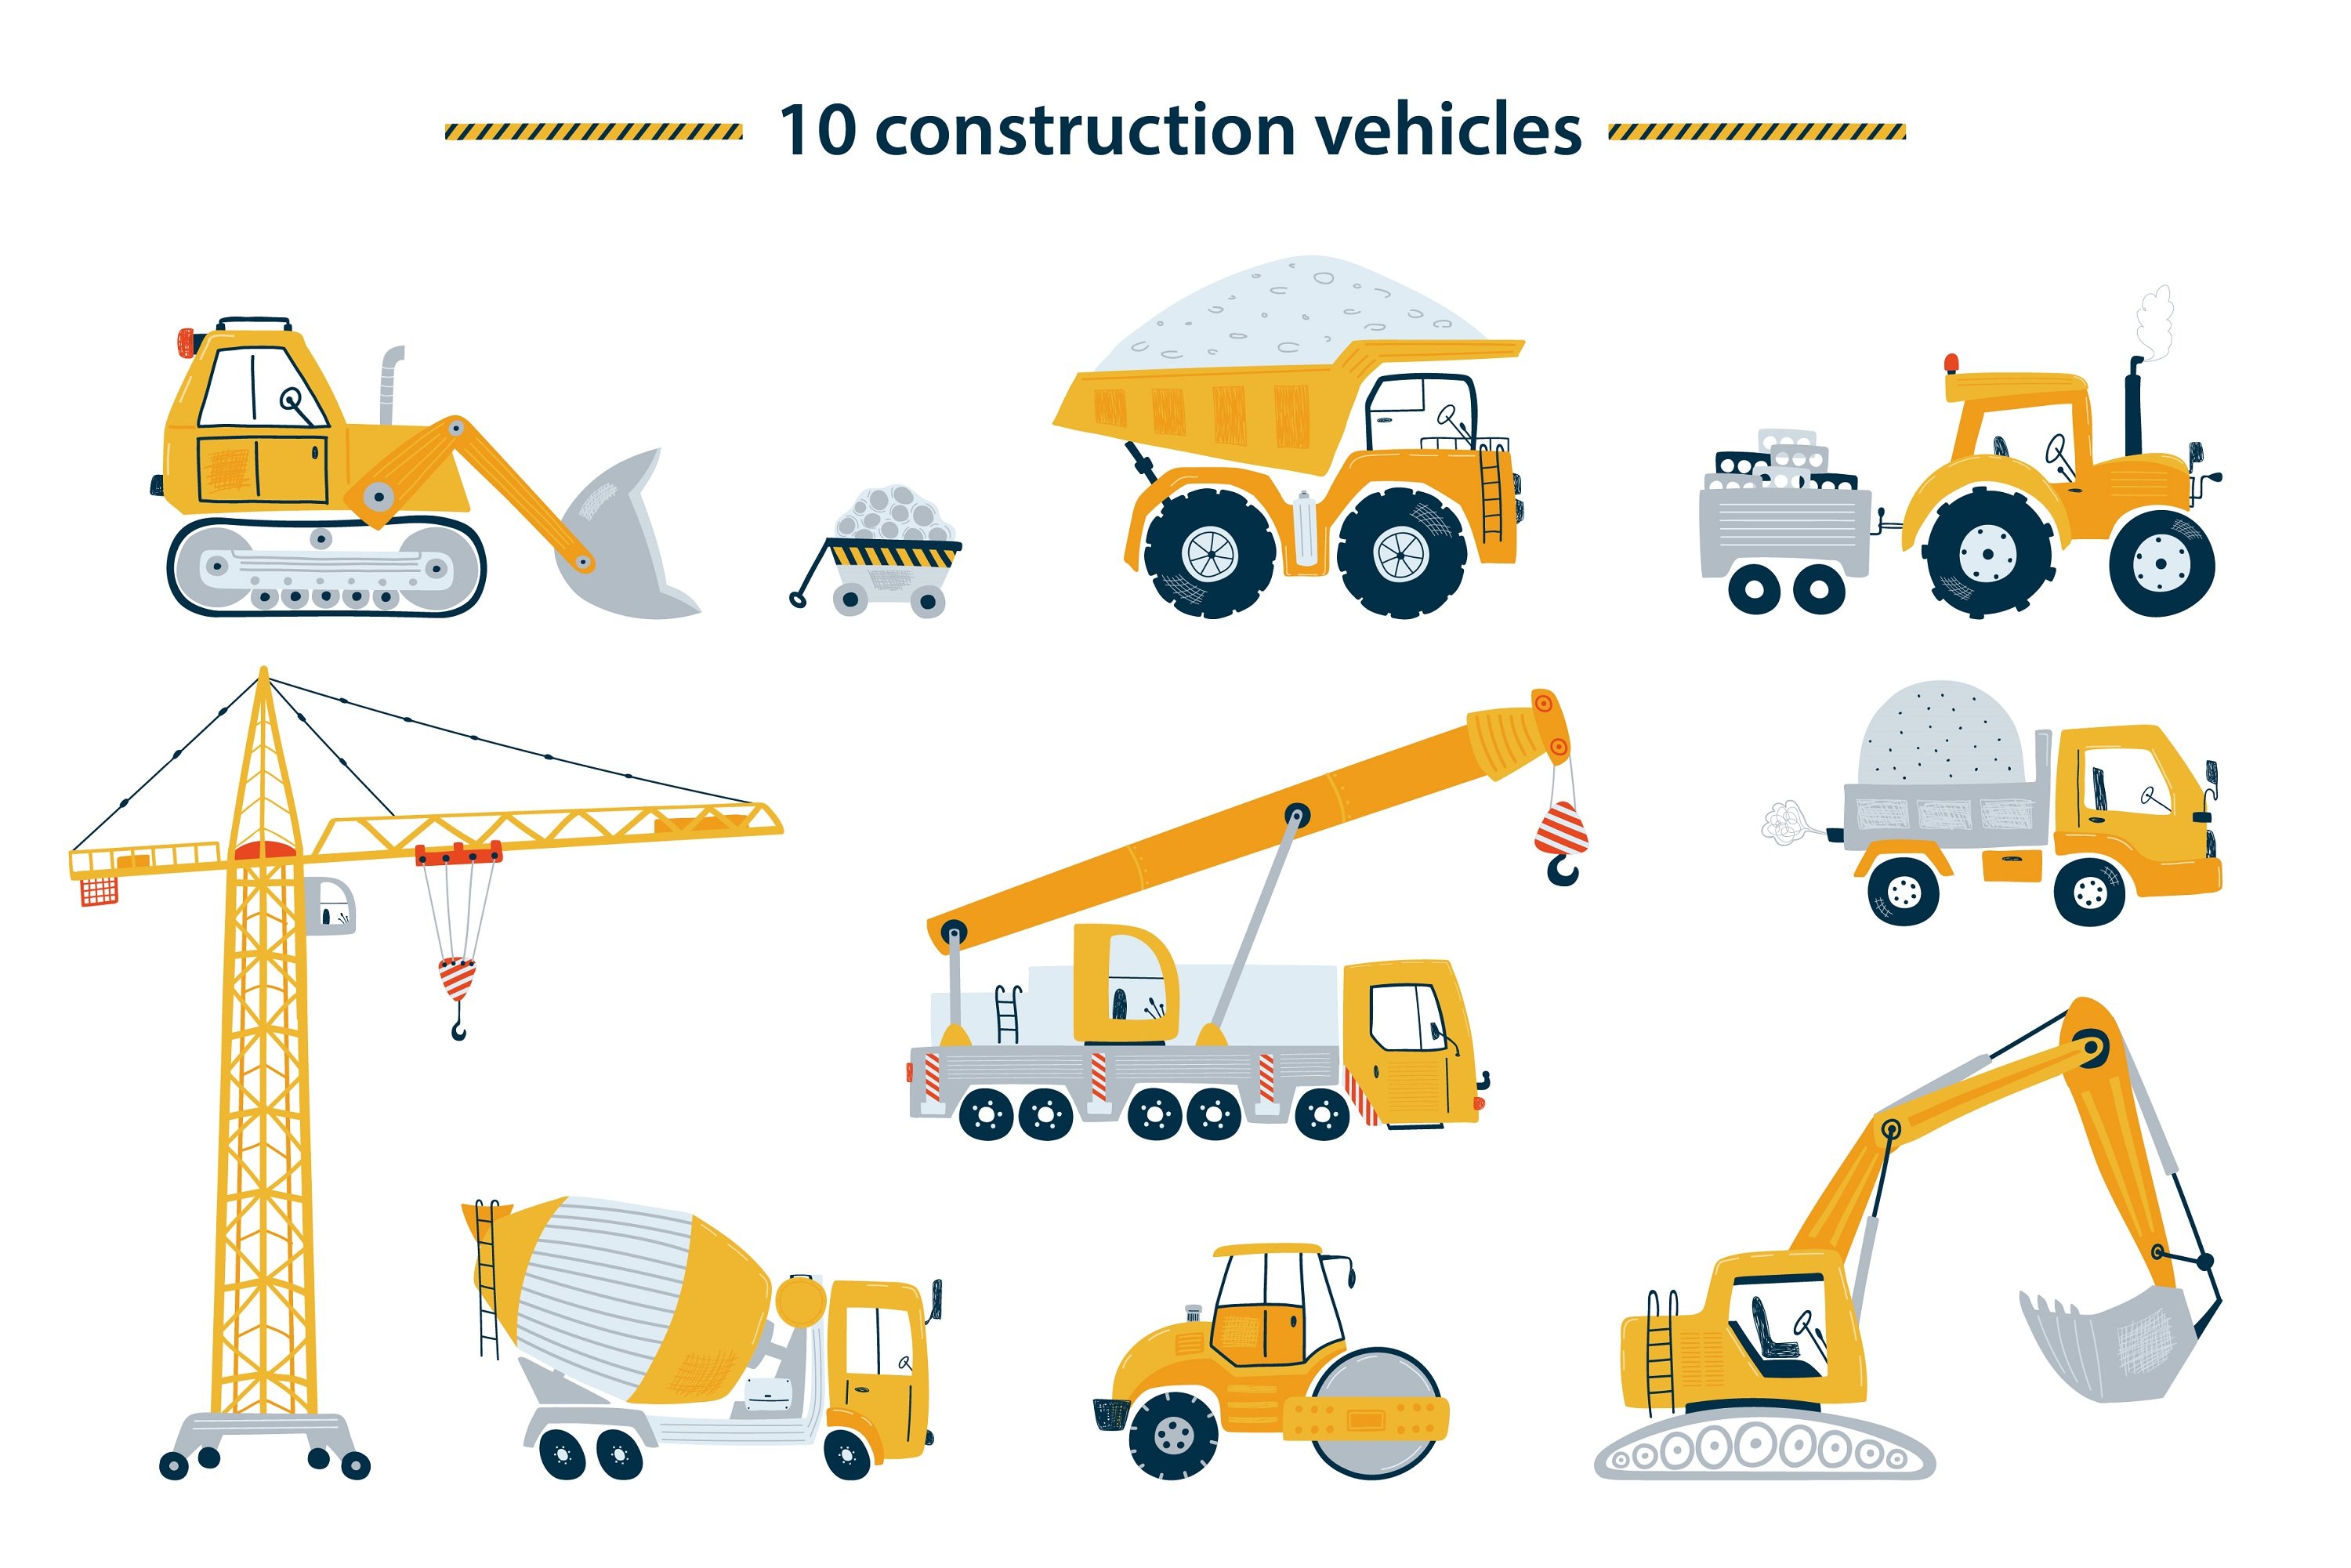 Some construction vehicles.